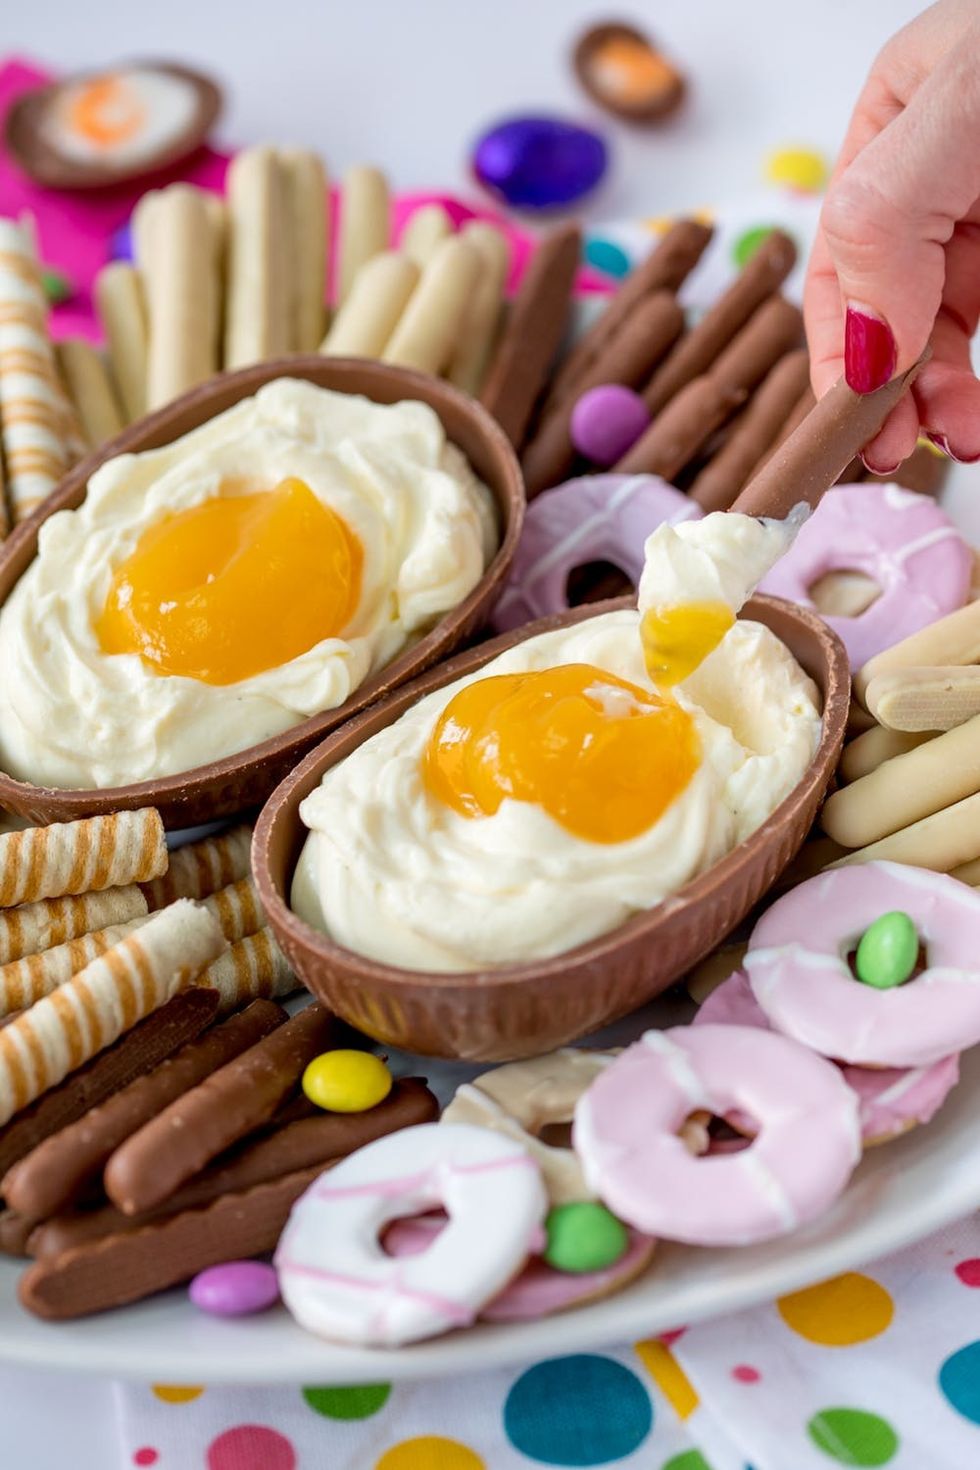 This Giant Cadbury Creme Egg Cheesecake Dip Recipe Is THE Easter Dessert!